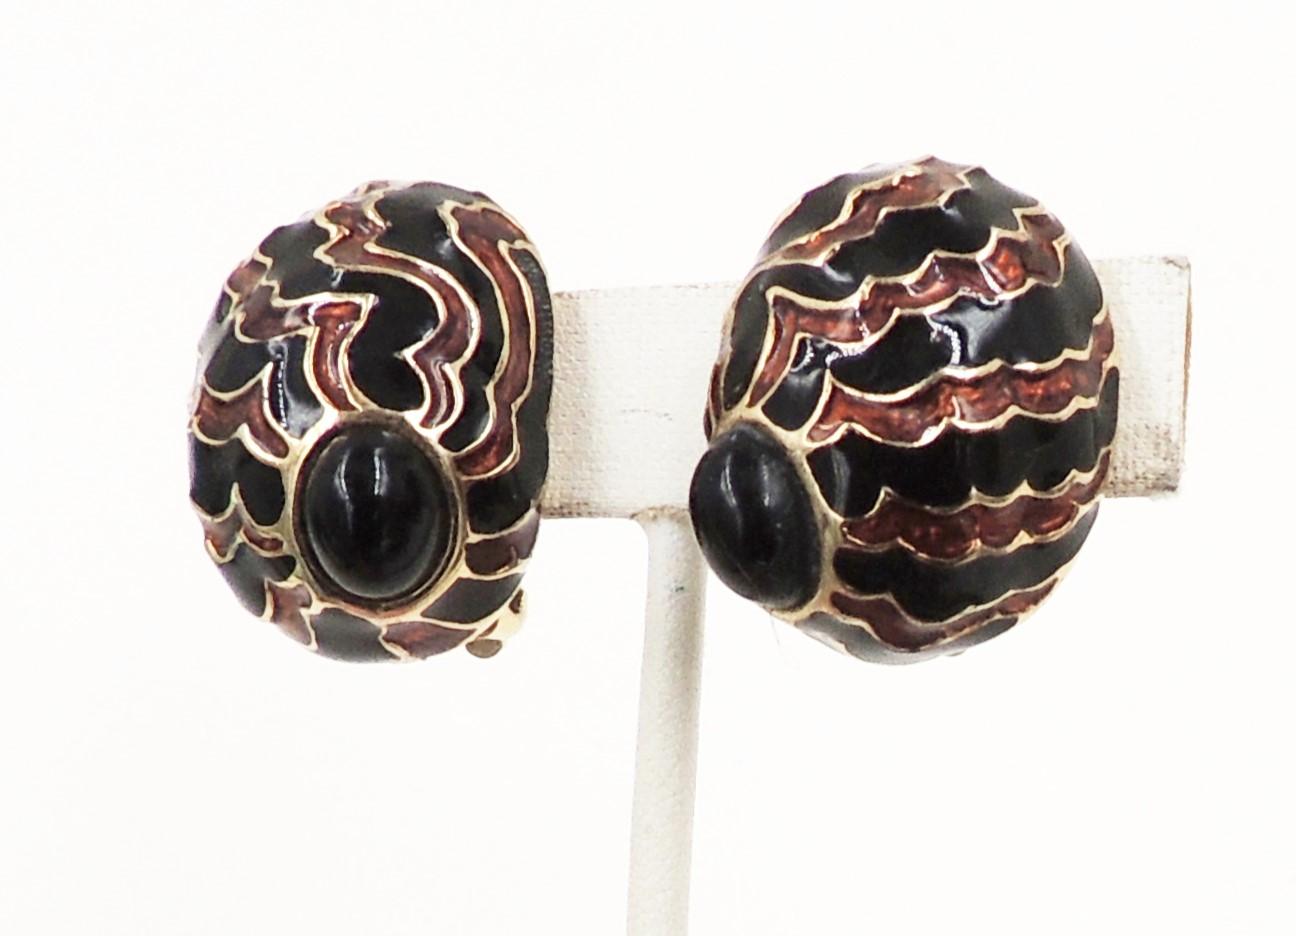 Vintage 1980s Ciner Cabochon Faux-Onyx Brown & Black Striped Clip Earrings In Excellent Condition For Sale In Easton, PA